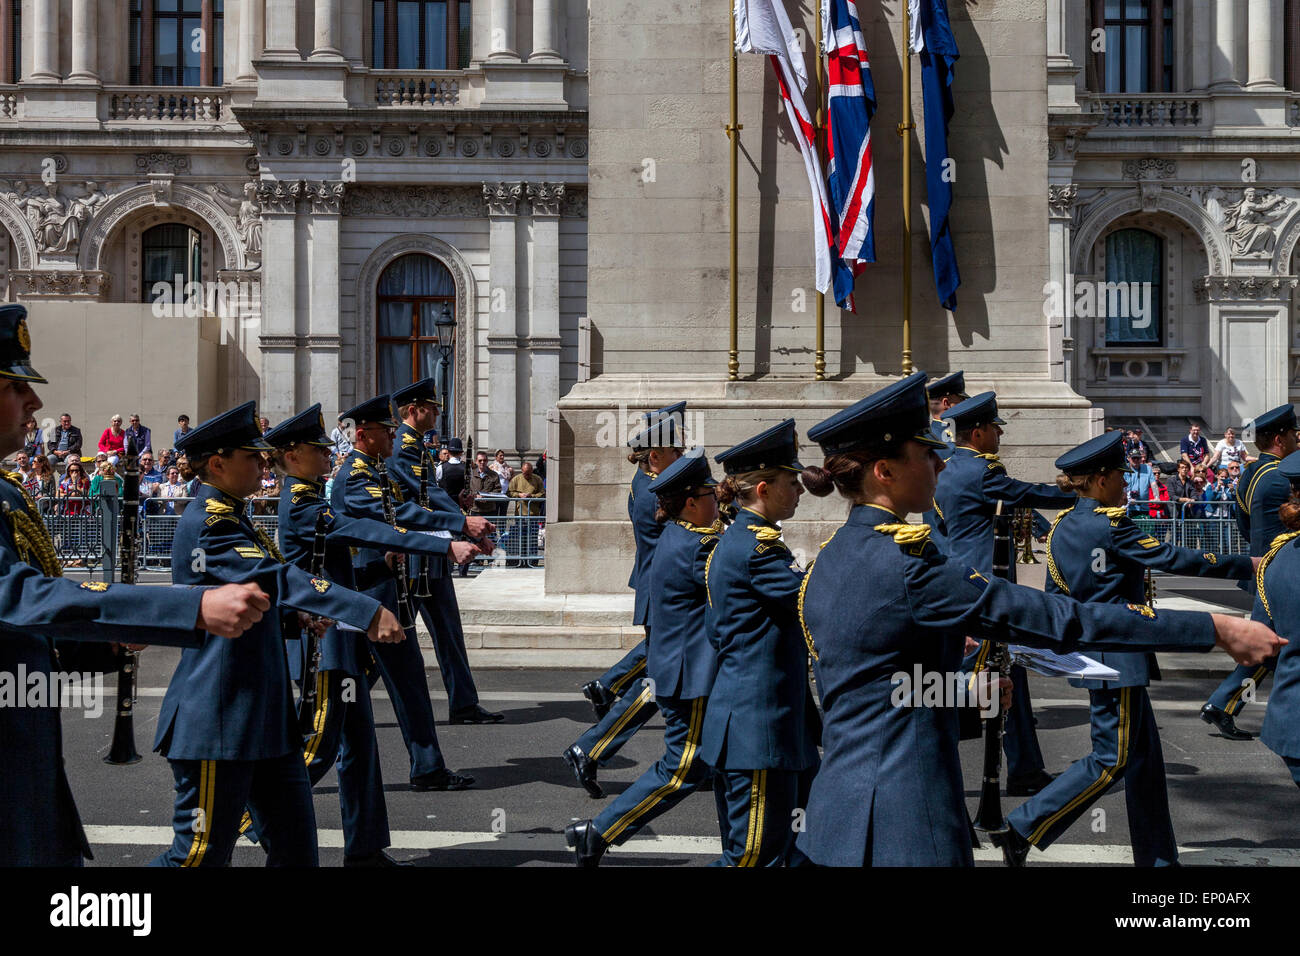 Members Of The Royal Air Force March Past The Cenotaph On The 70th Anniversary Of VE Day, London, England Stock Photo